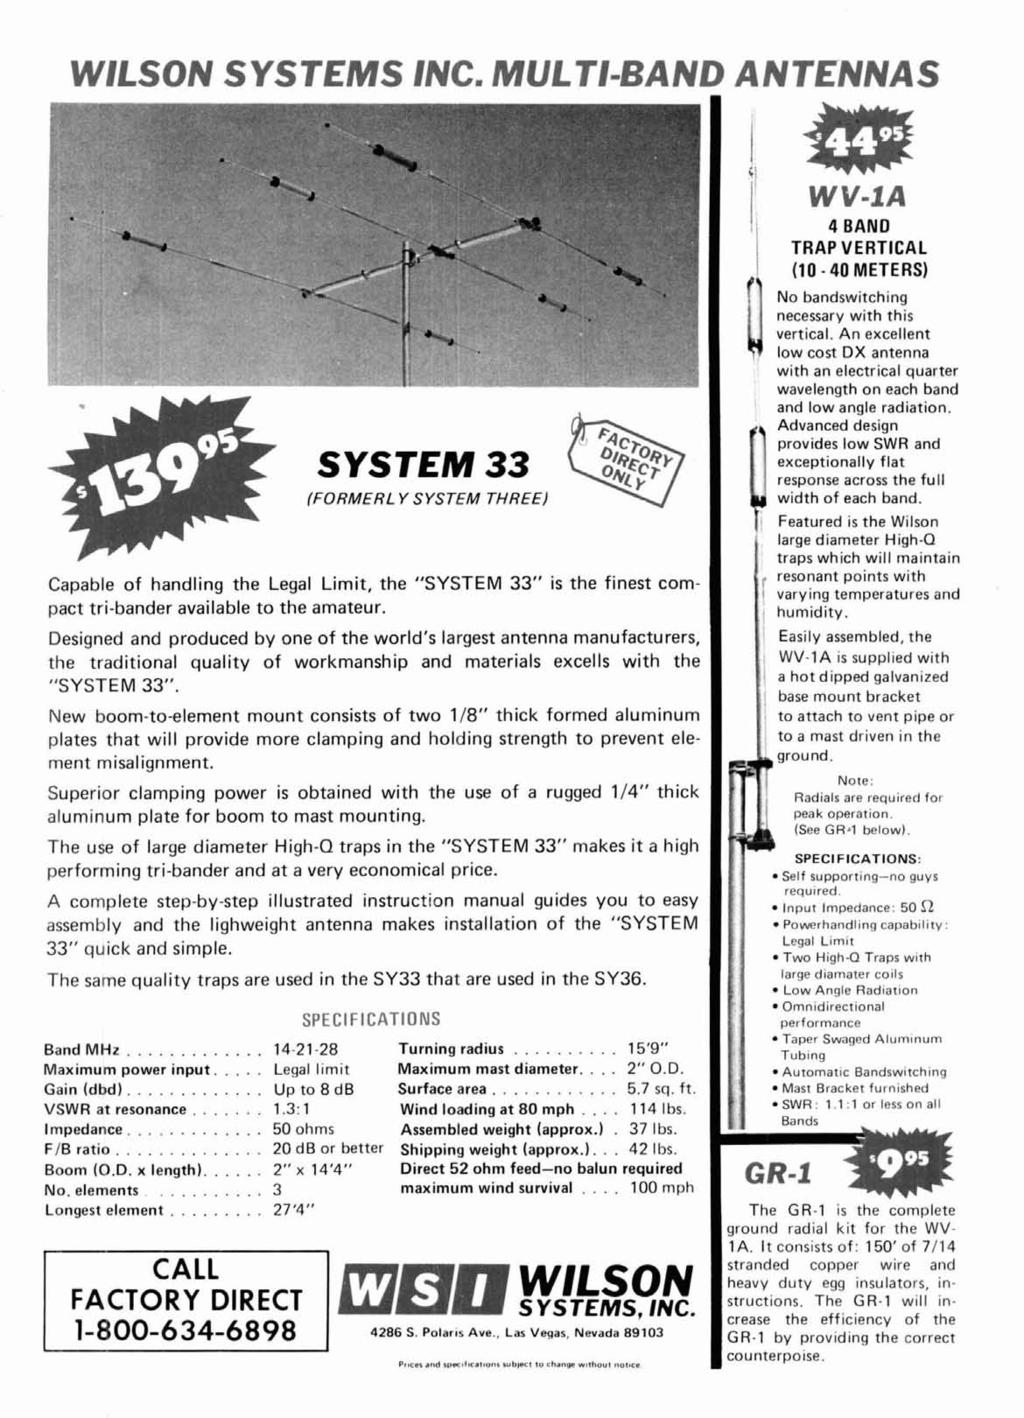 WILSON SYSTEMS INC. MULTI-BAND ANTENNAS (FORMERLY SYSTEM THREE) Capable of handling the Legal Limit, the "SYSTEM 33" is the finest compact tri-bander available to the amateur.